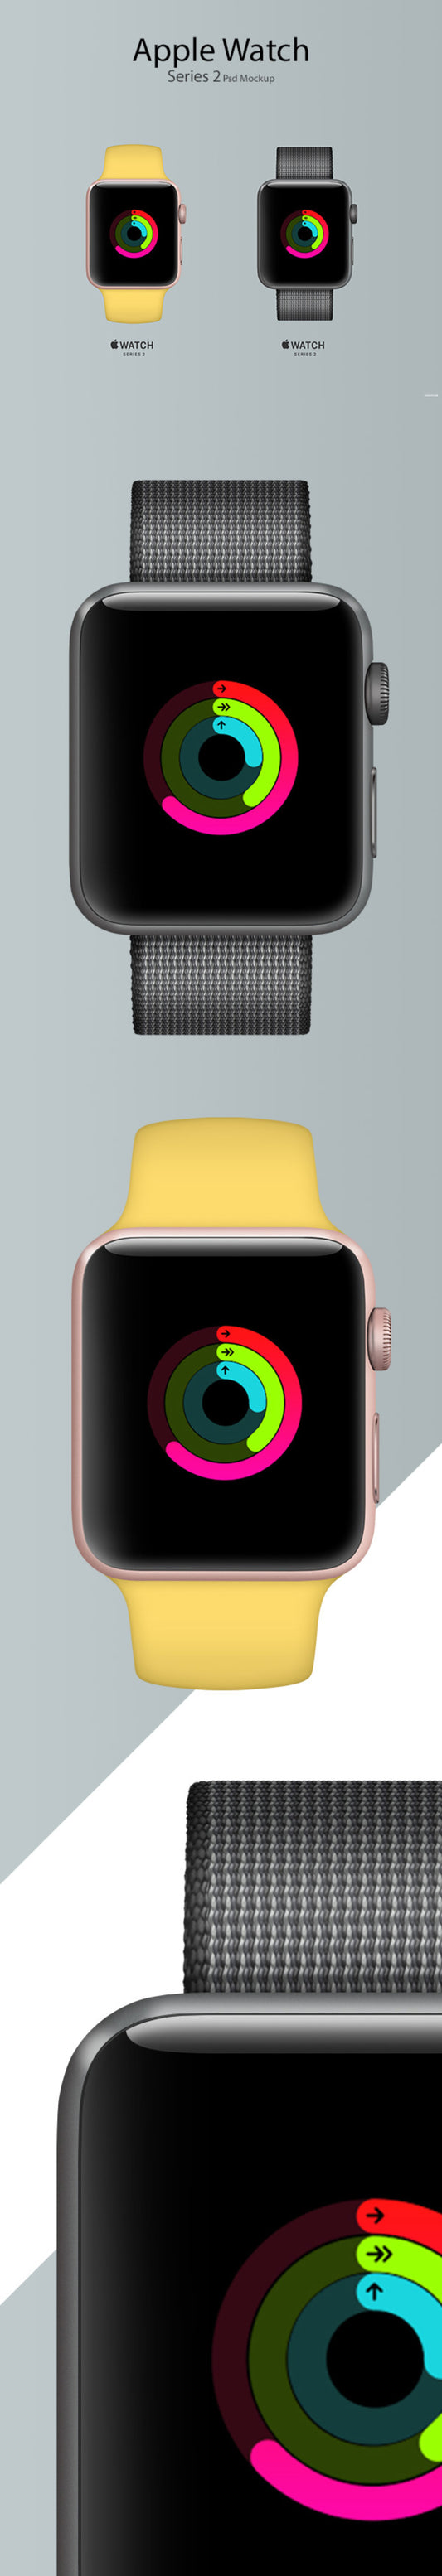 Free Apple Watch Series 2 Mockup Front View